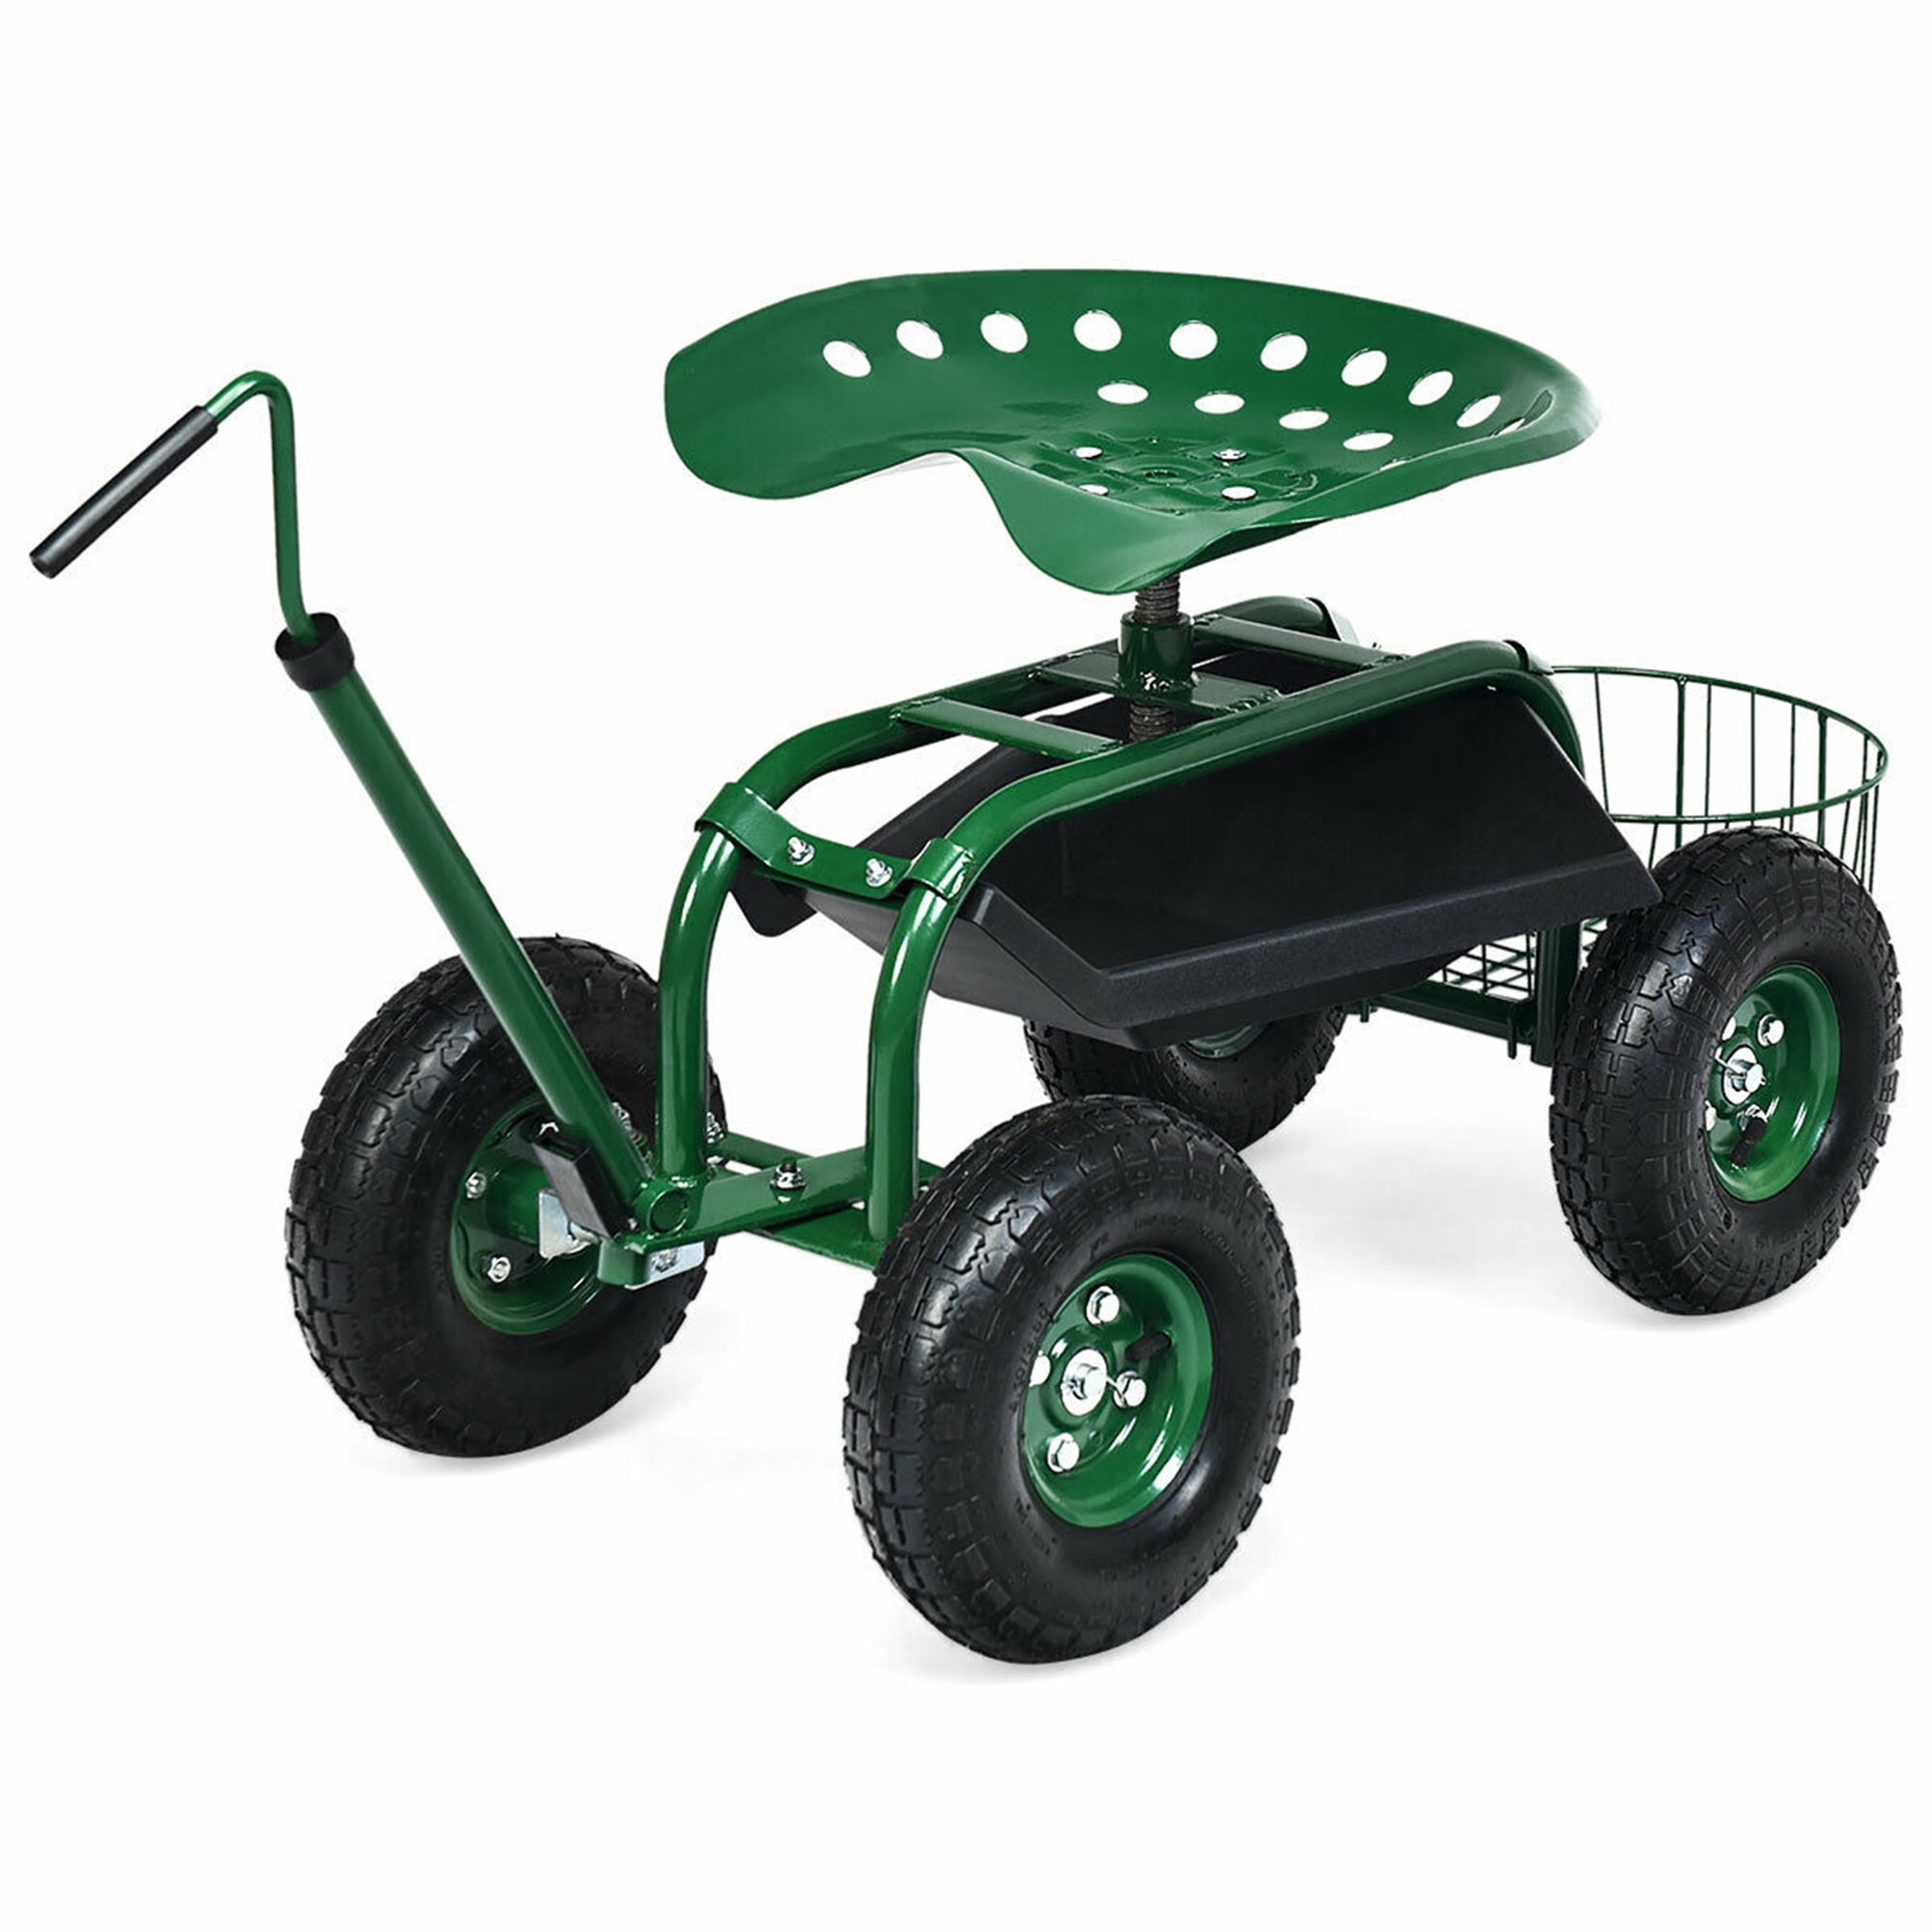 Rolling Gardening Cart Scooter Workseat Large Wheels Waterproof Cover Included Height Adjustable Swivel Chair. 360degree Rotation Basket Bralys BRALYS Garden Cart with Seat 